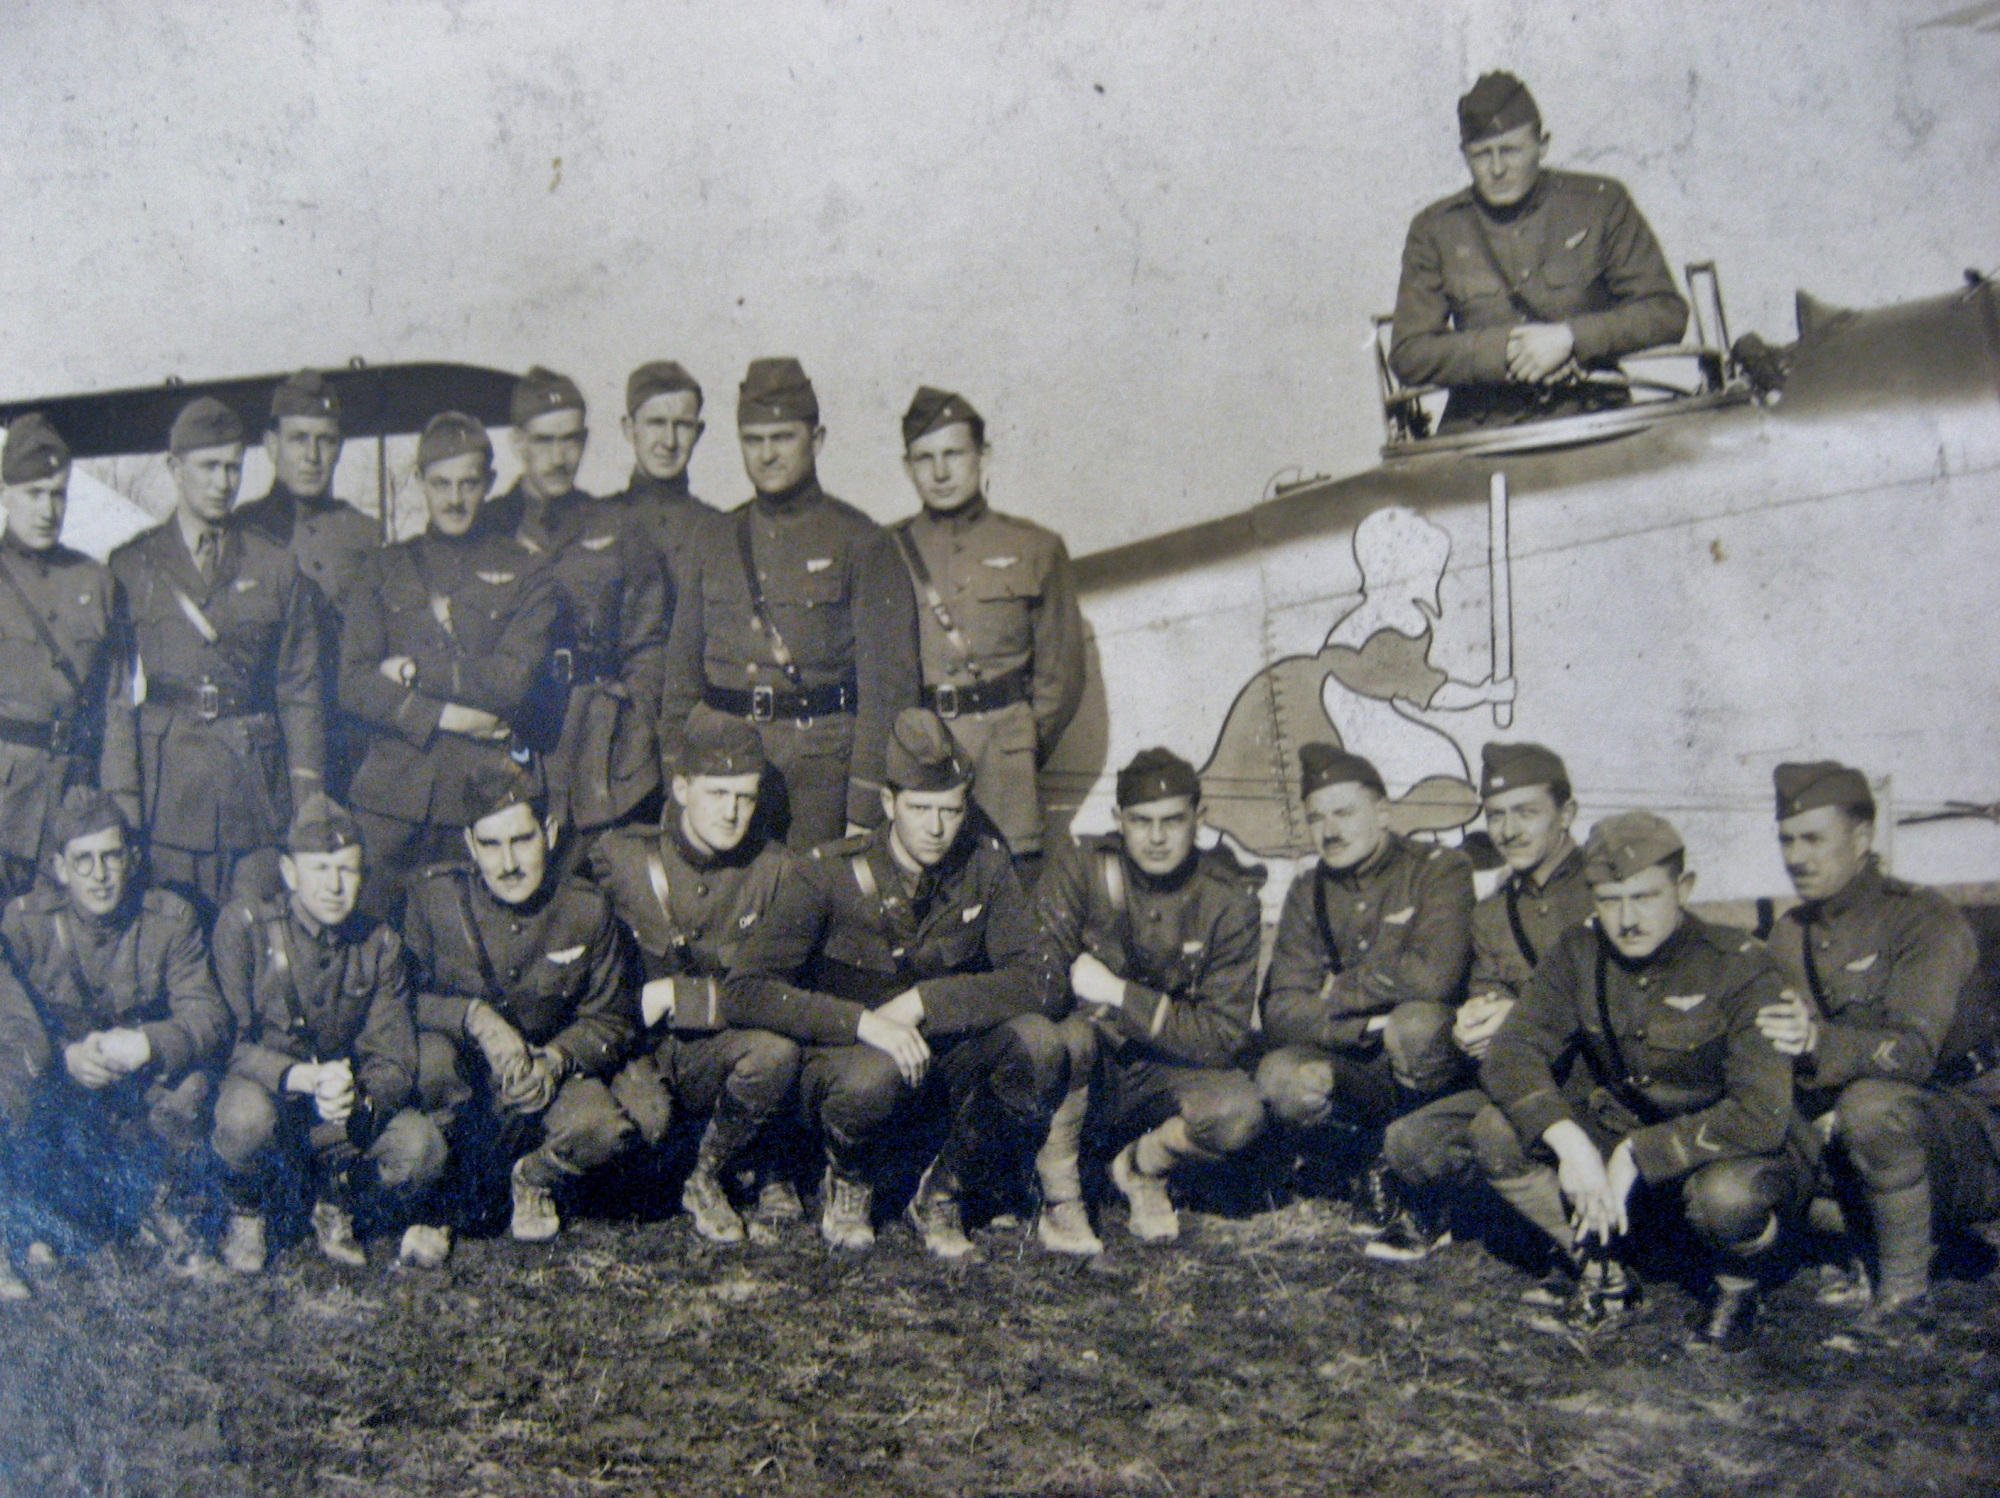 Members of the 50th Aero Squadron pose for a photograph in front of their DH-4 “Liberty” airplane.  Bill Frayne is second from the far right. Image courtesy Golden Age Air Museum, used with permission.